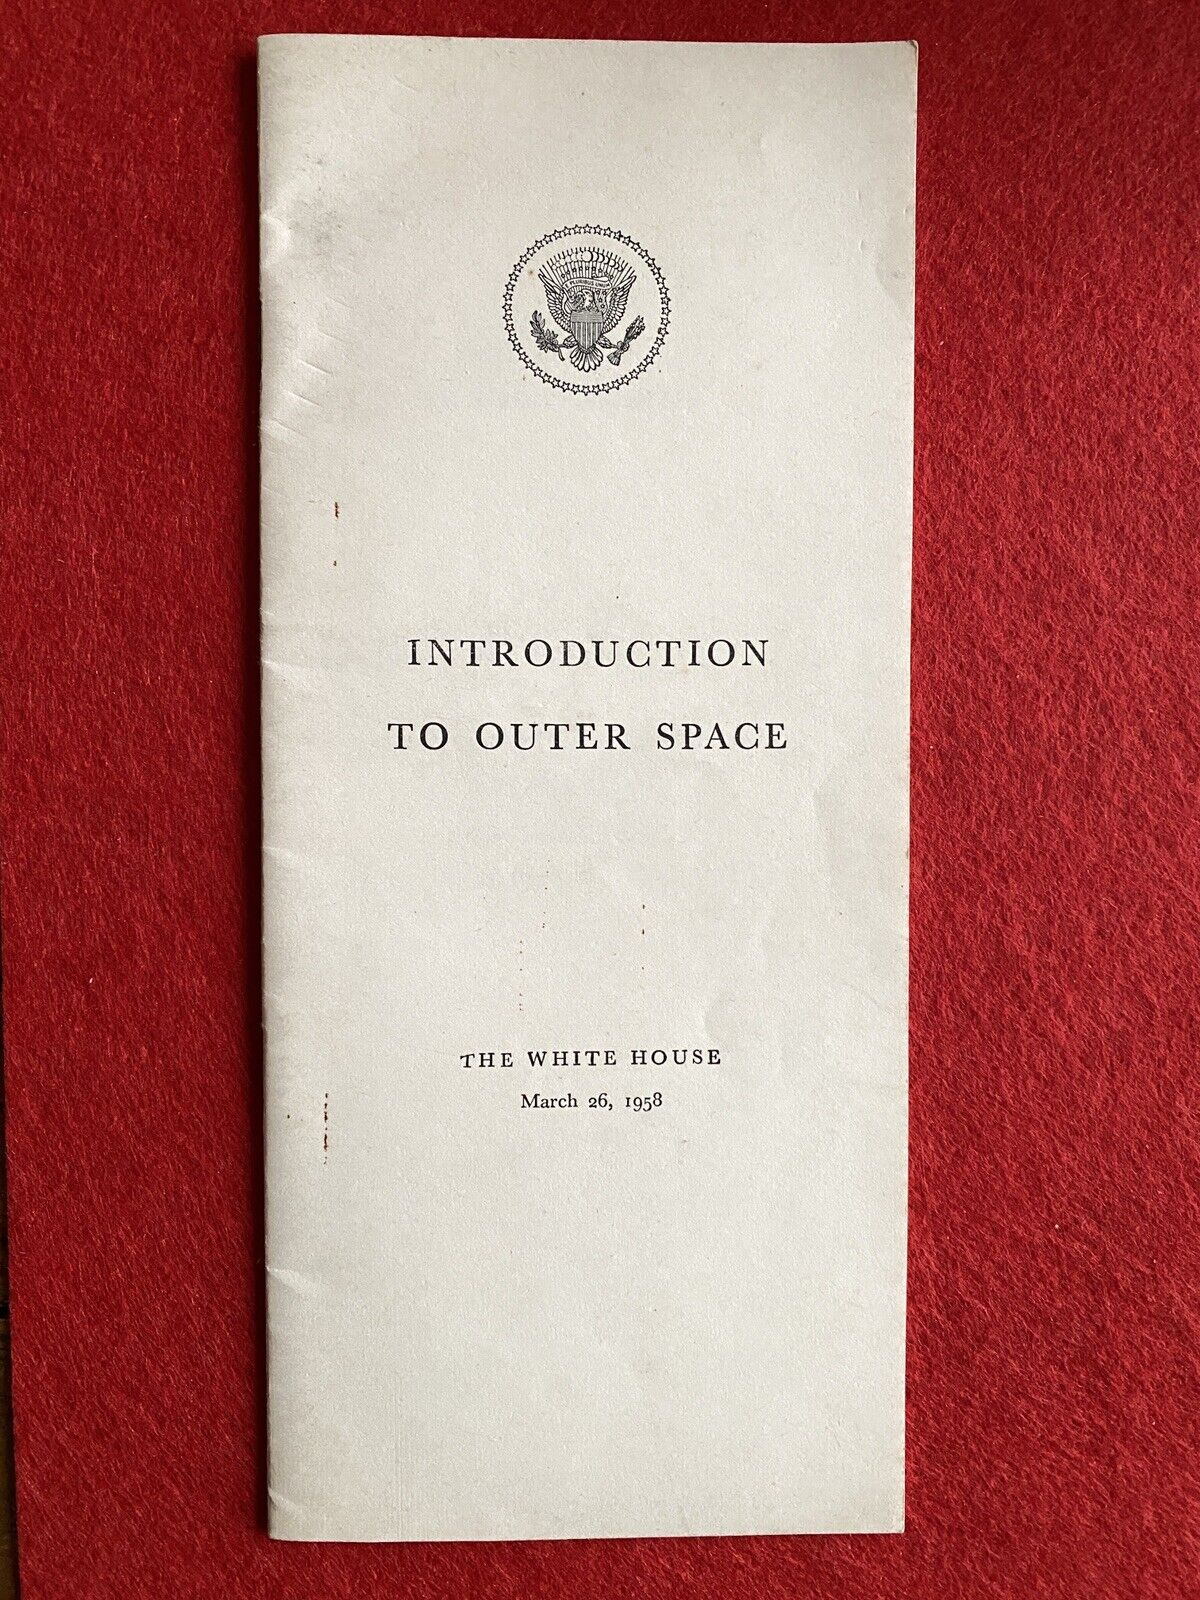 Rare Introduction to Outer Space Eisenhower White House Pamphlet 1958 Original